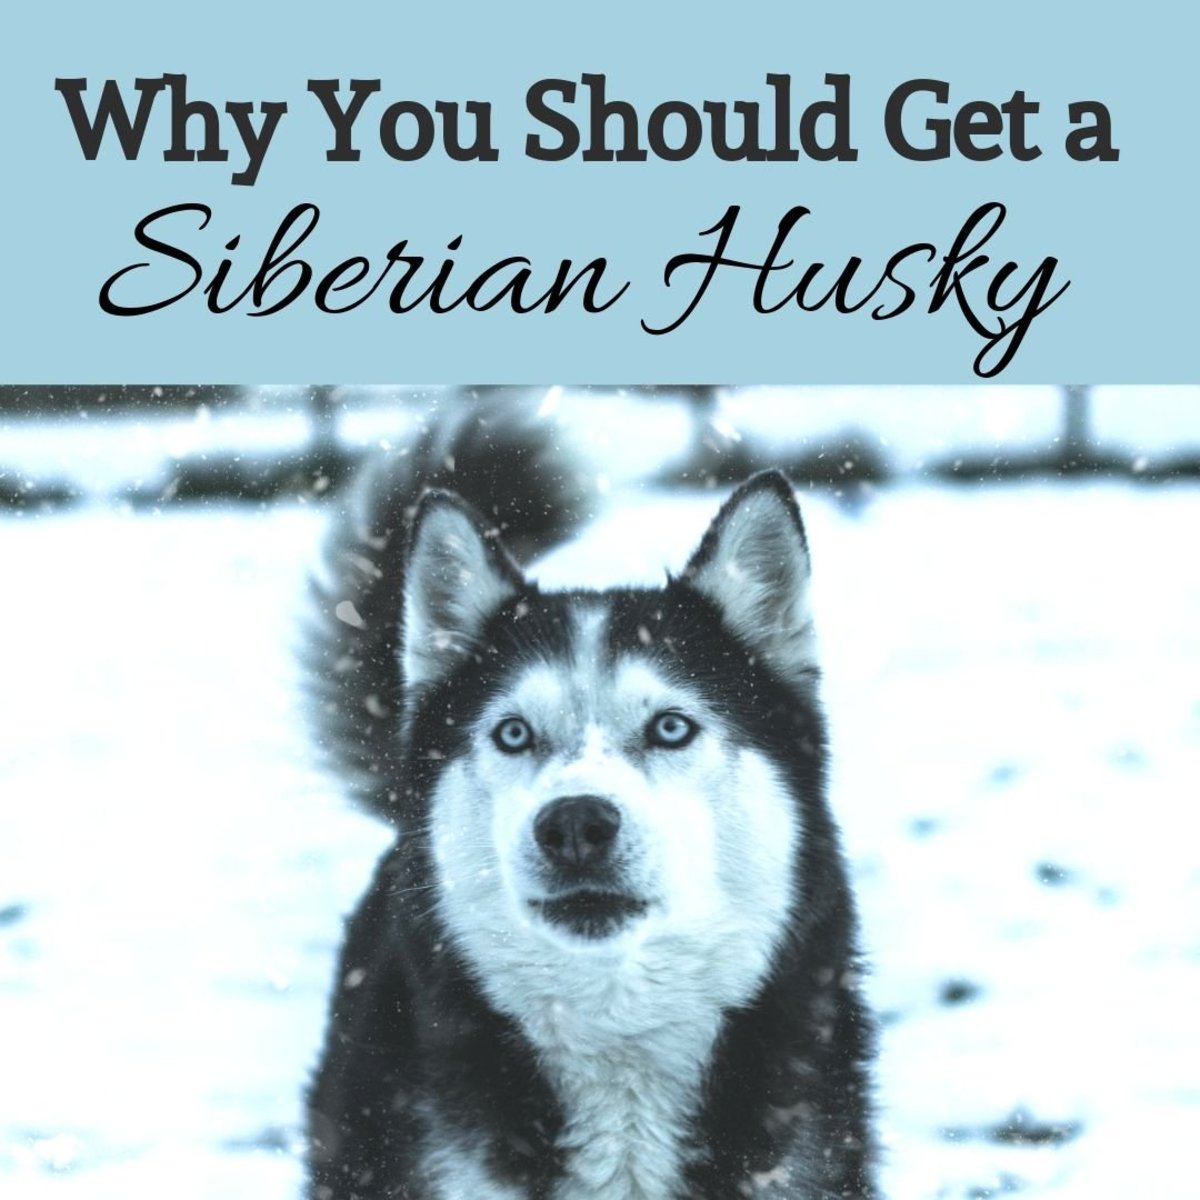 Learn all about why you should (or shouldn't) get a Siberian Husky as a pet.